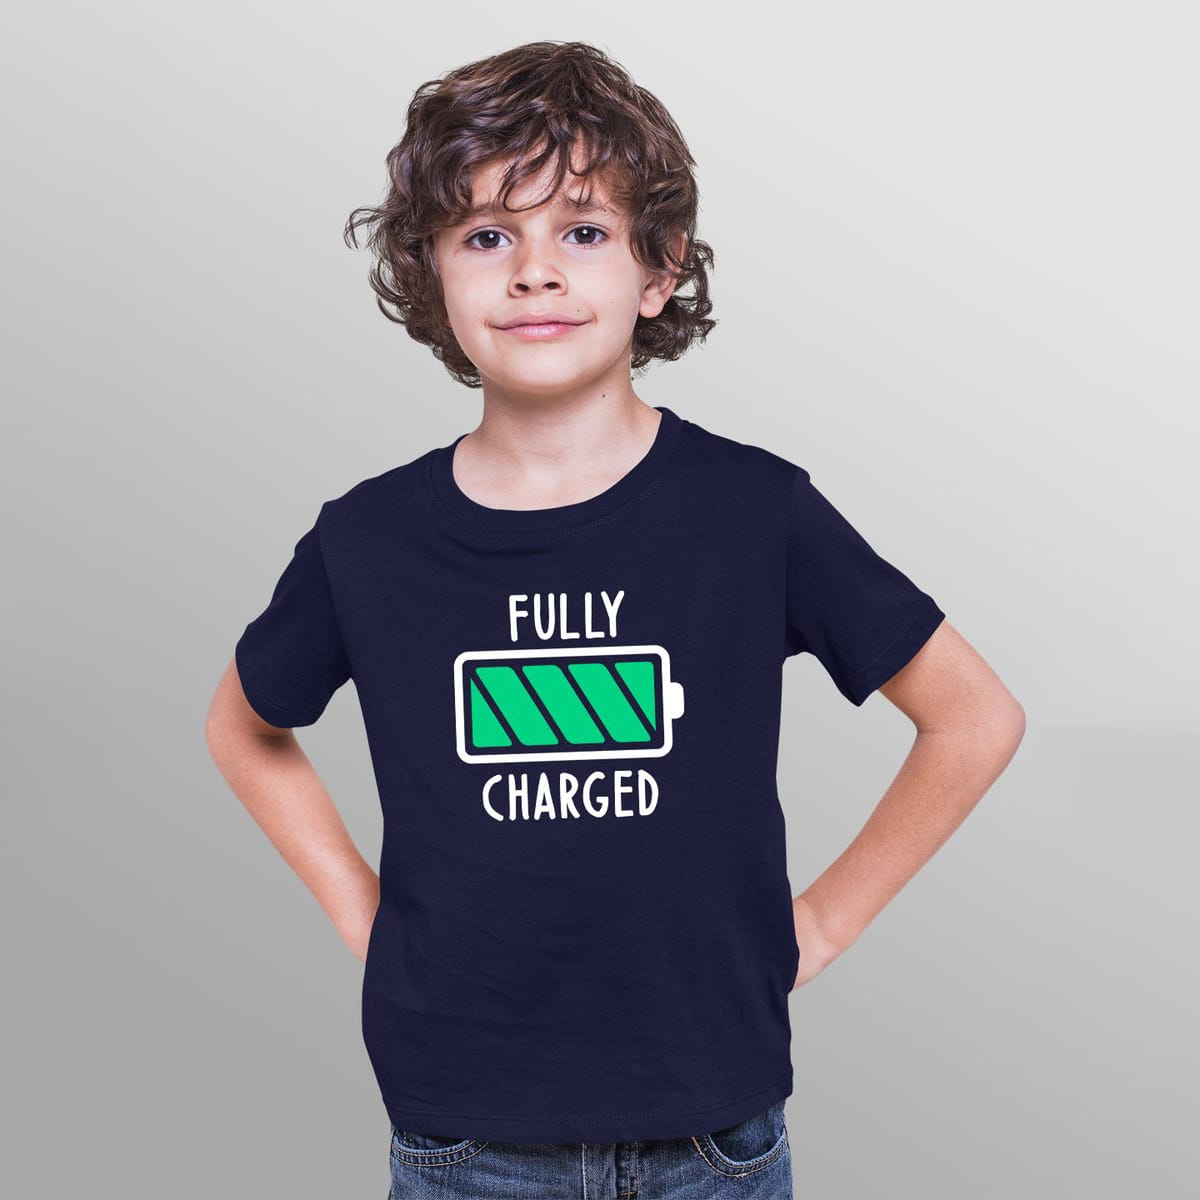 FULLY CHARGED KIDS T SHIRT 2